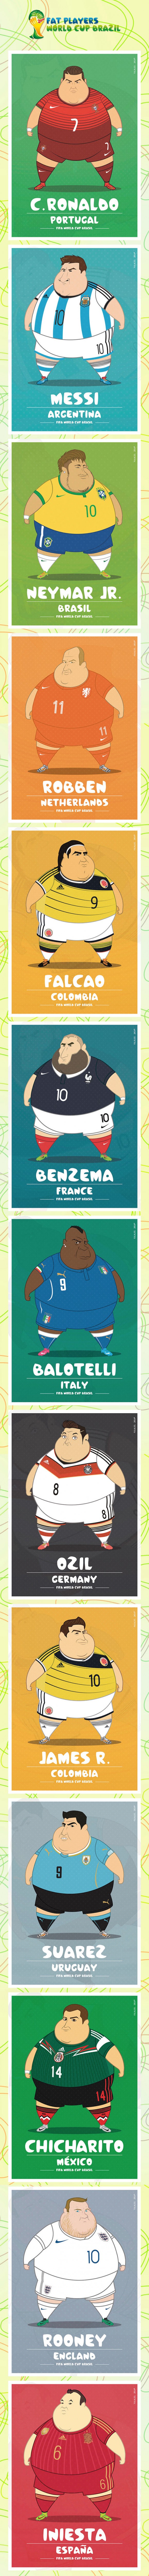 Fat players world cup brazil